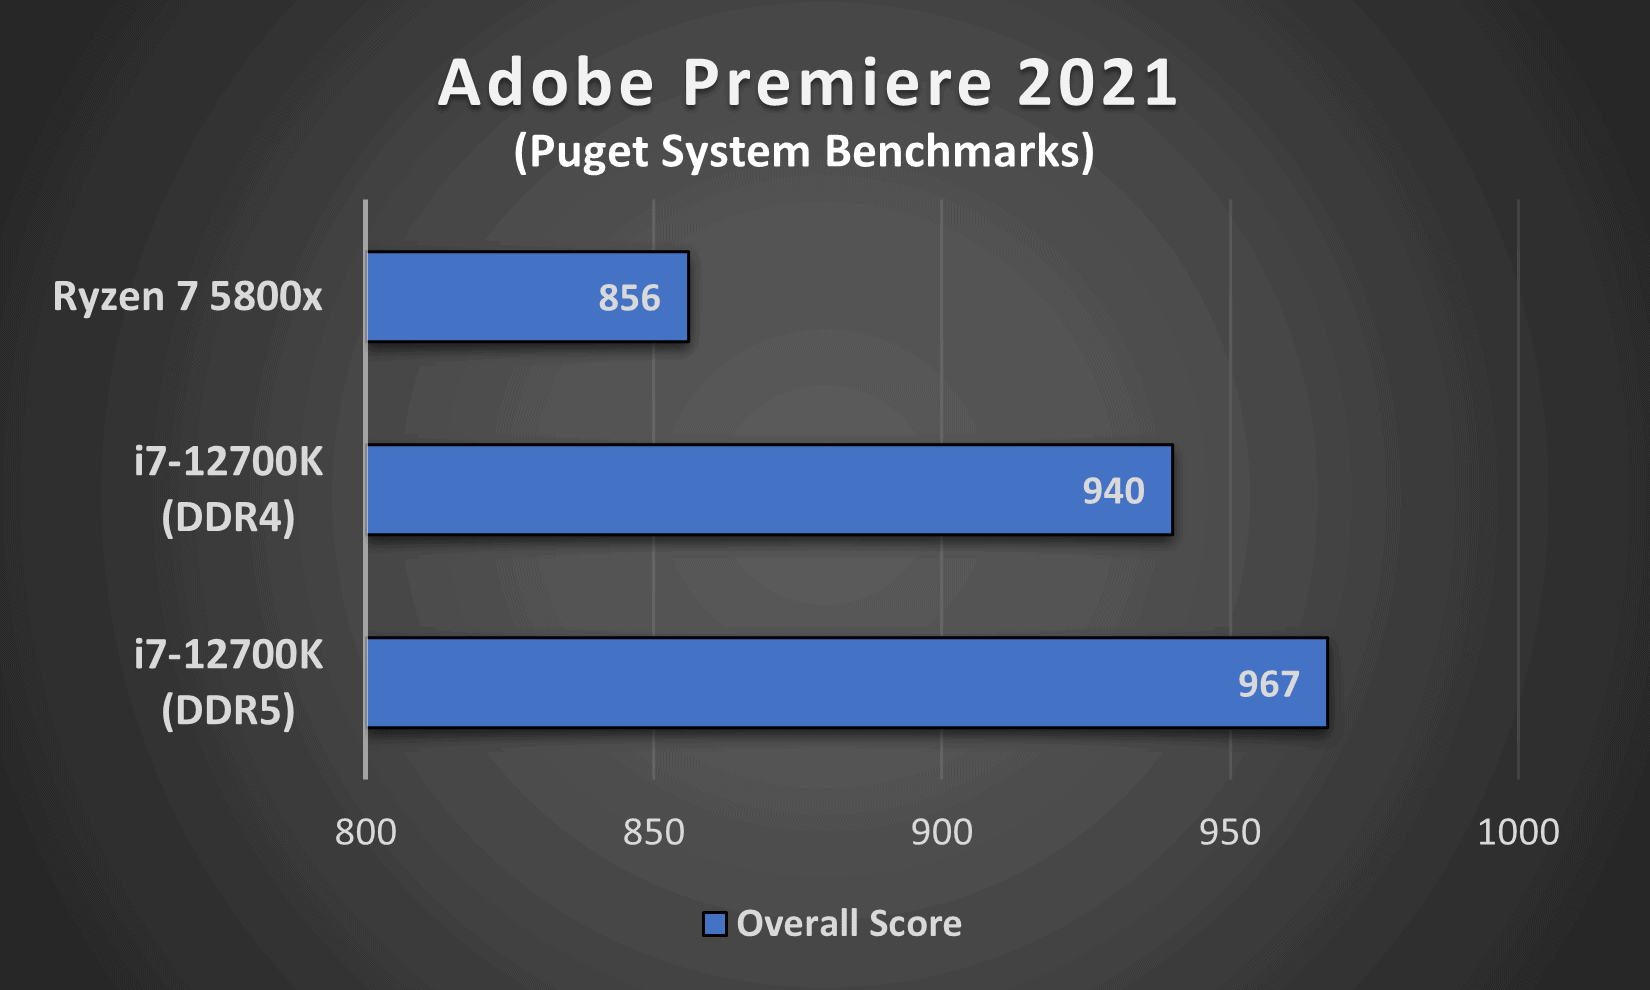 Adobe Premiere 2021 performance comparison between Intel's i7 12700K (DDR4 and DDR5) and AMD's Ryzen 7 5800x